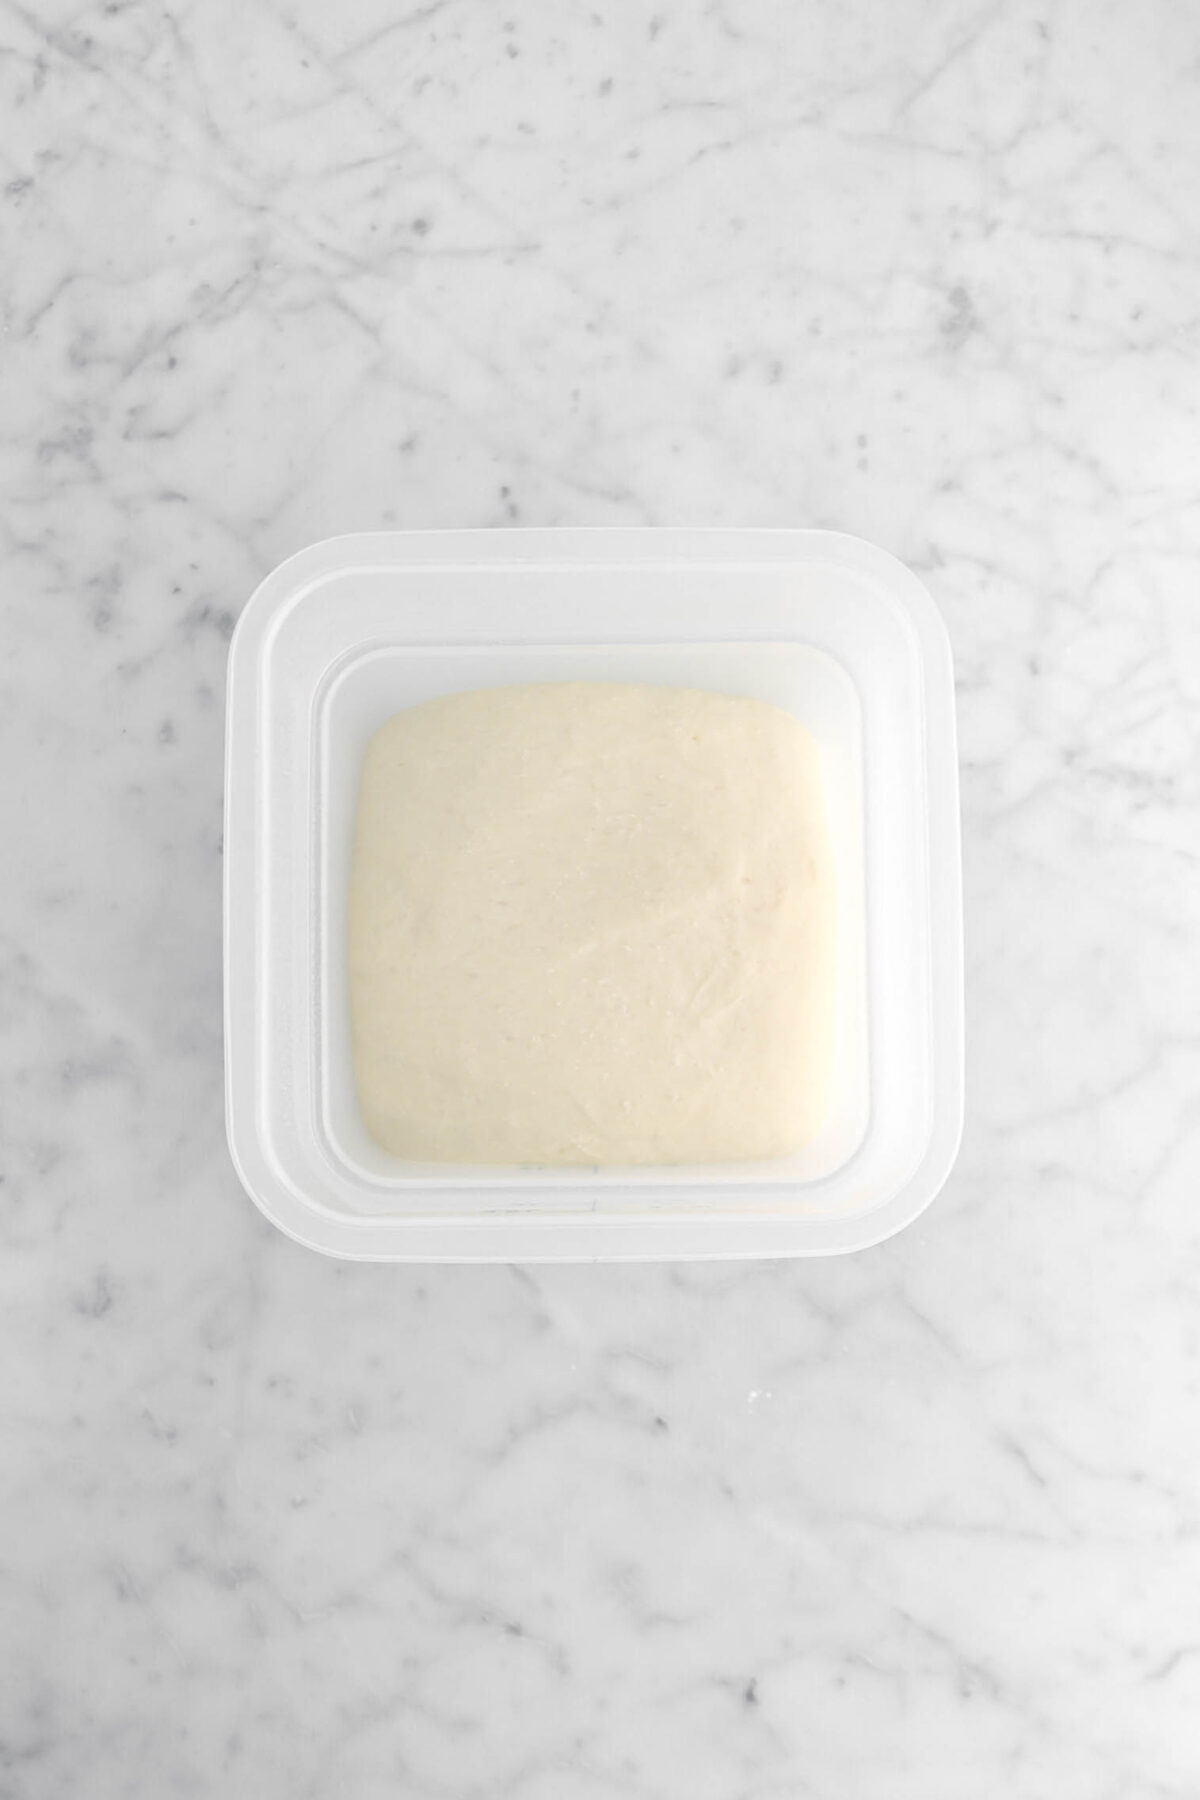 proofed dough in square container.